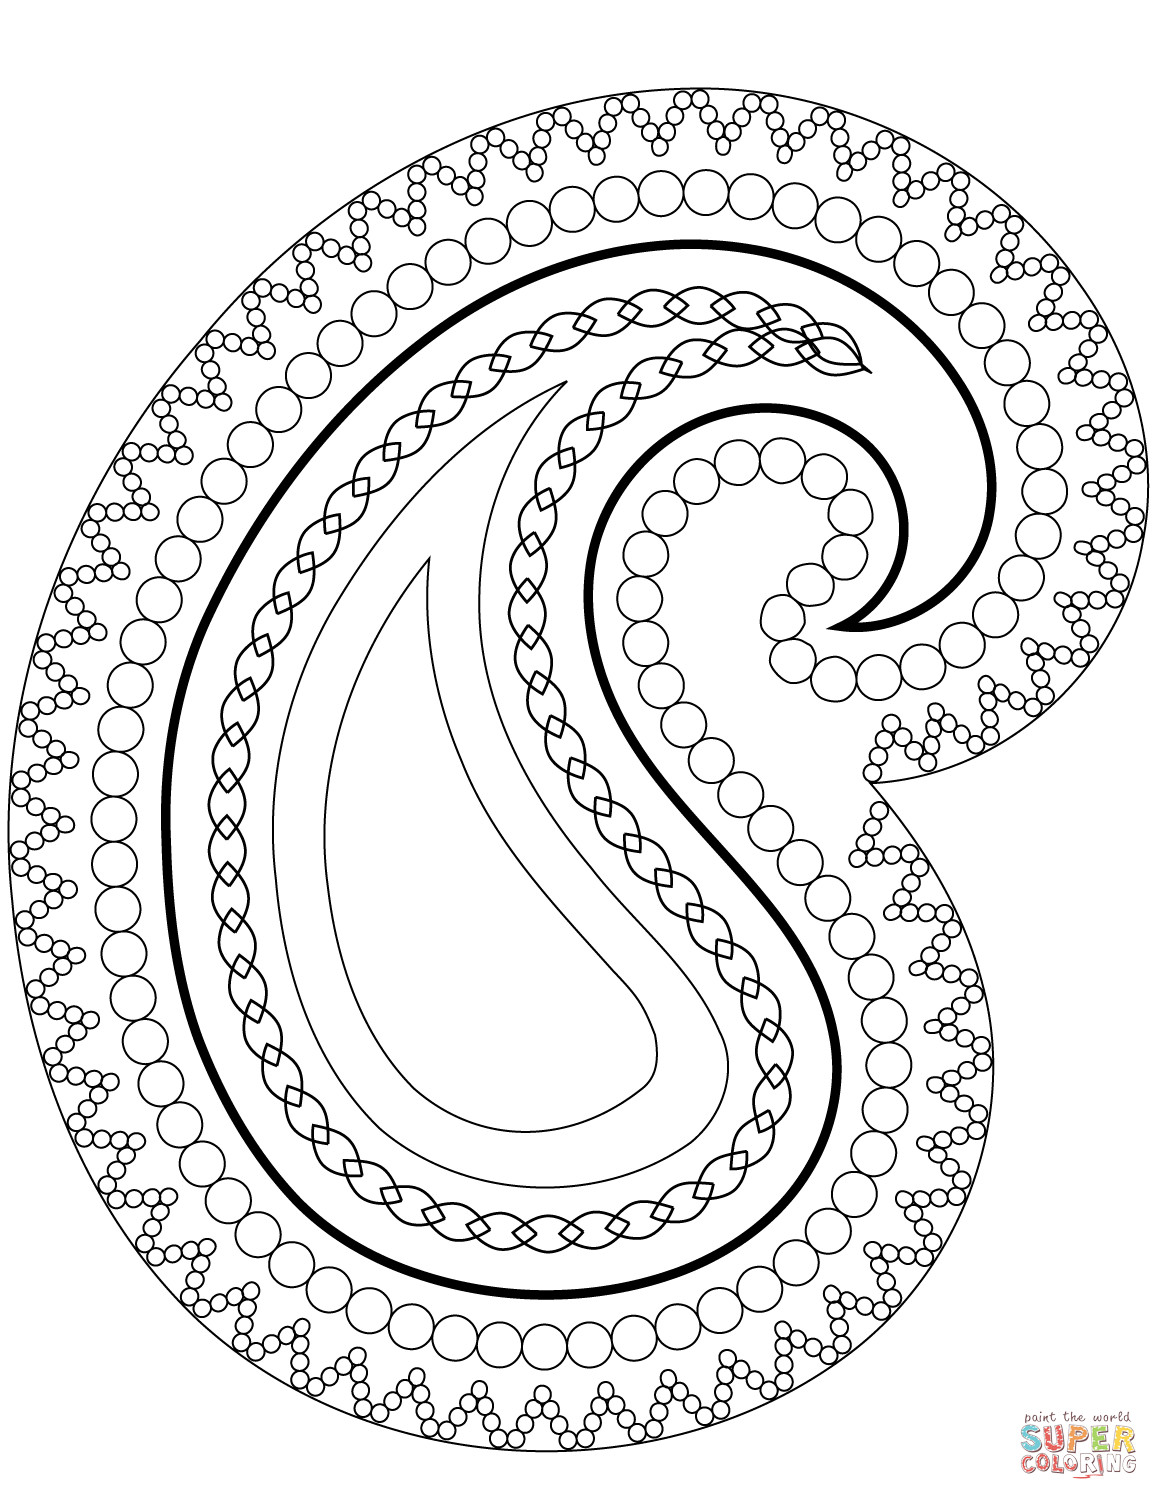 Paisley Printable Coloring Pages
 Paisley coloring page